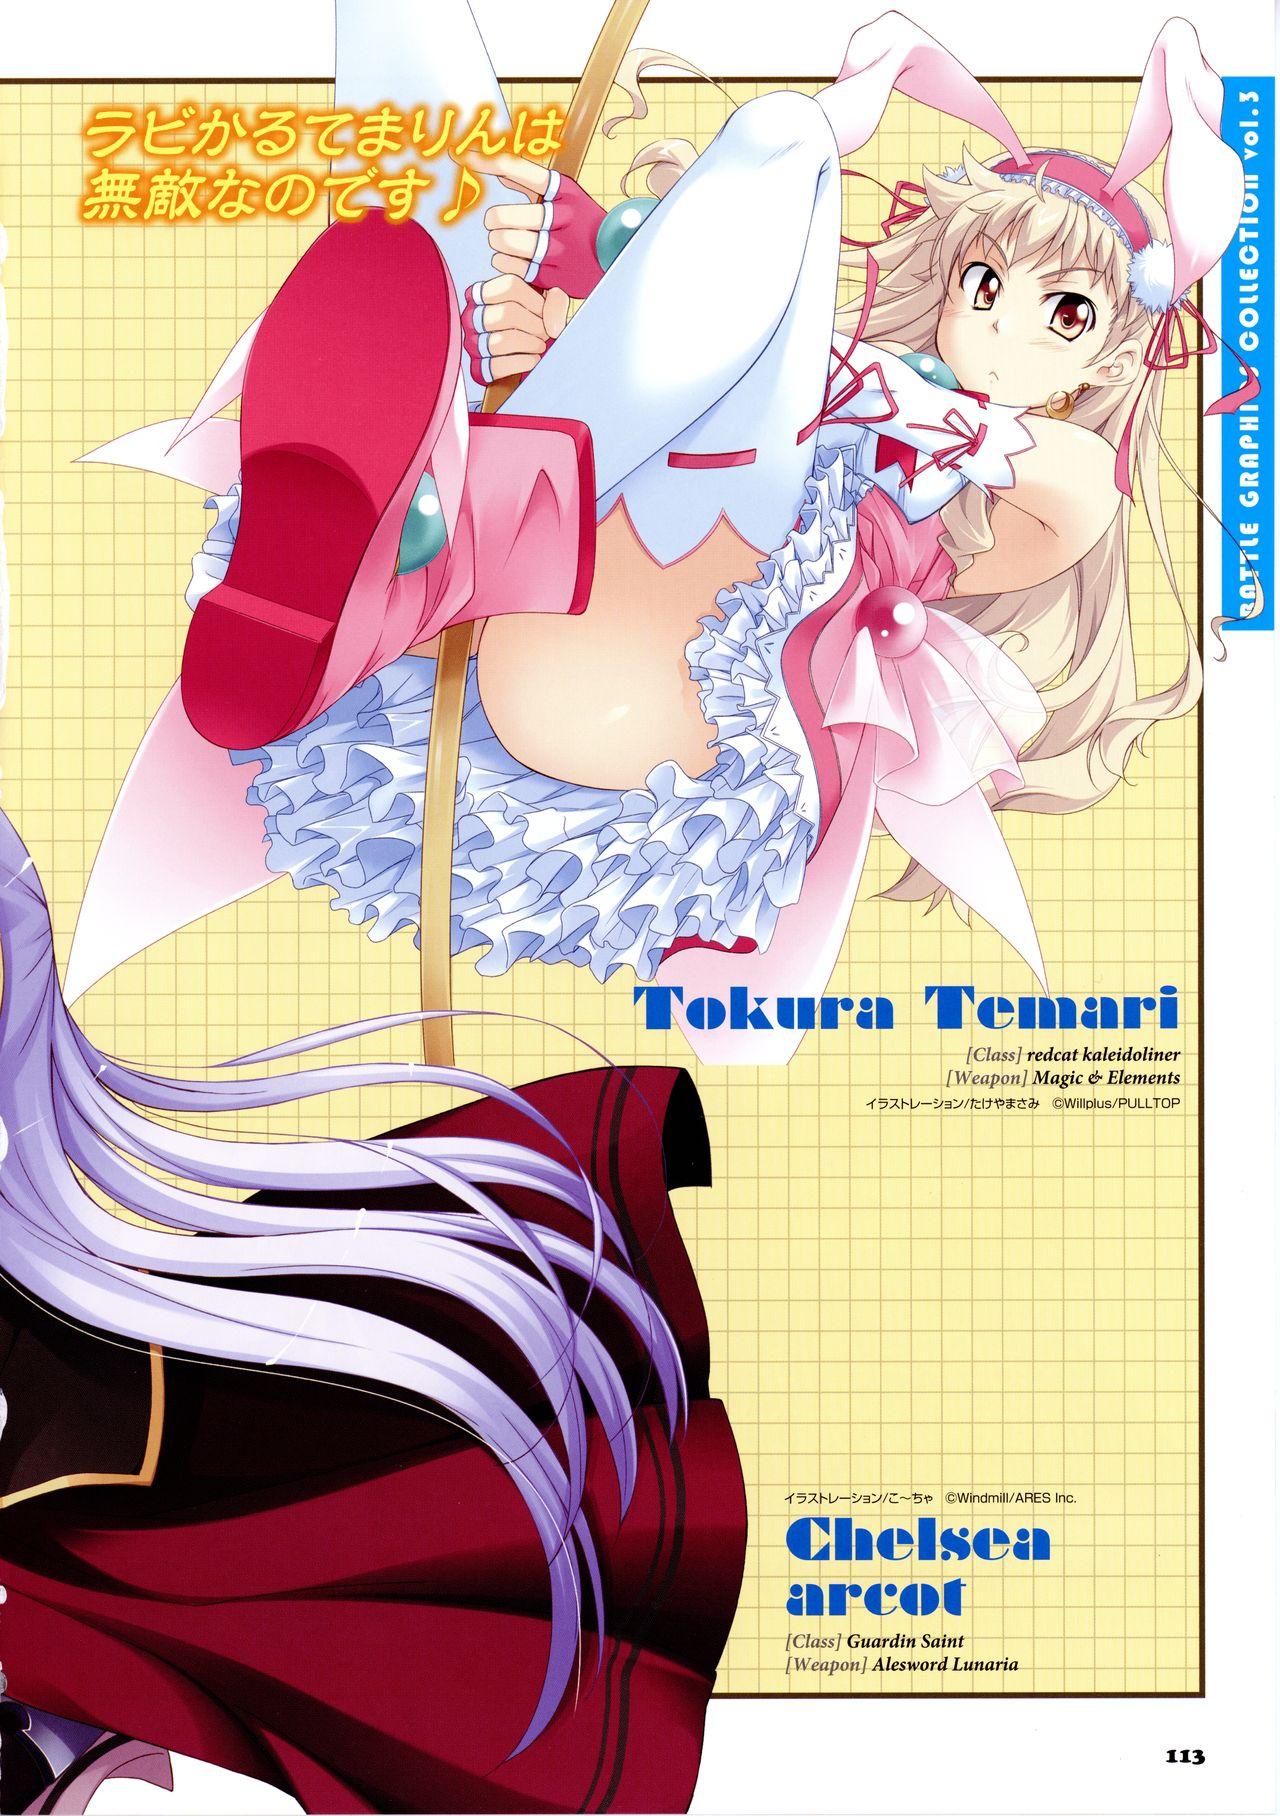 Twinkle☆Crusaders Passion Star Stream Visual Fanbook 126